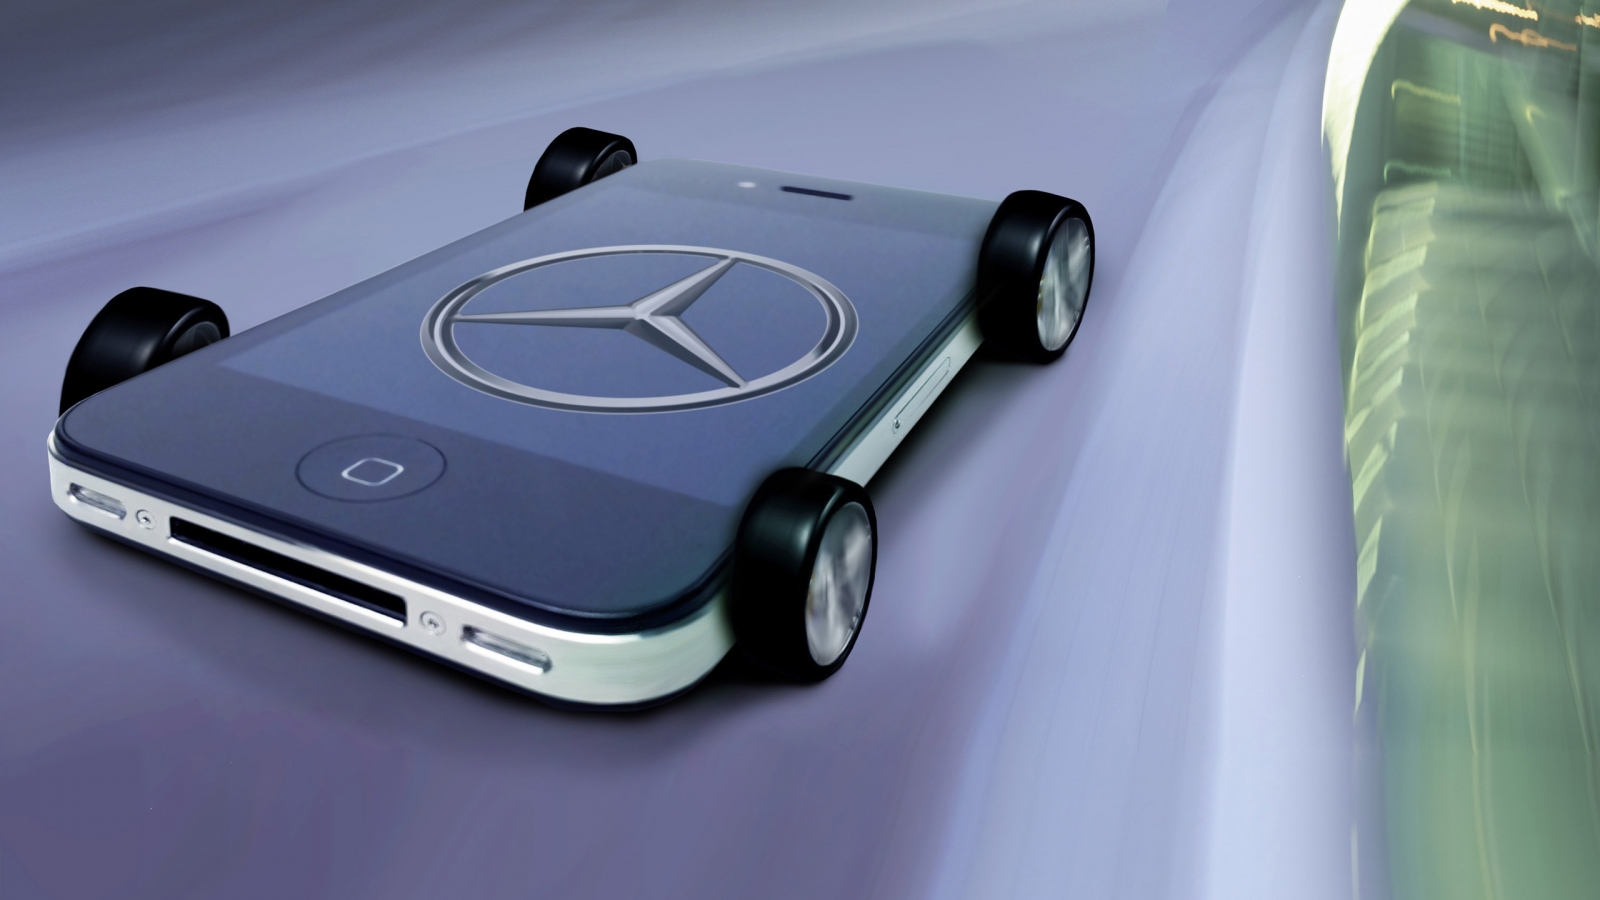 Mercedes Benz iPhone for 1600 x 900 HDTV resolution